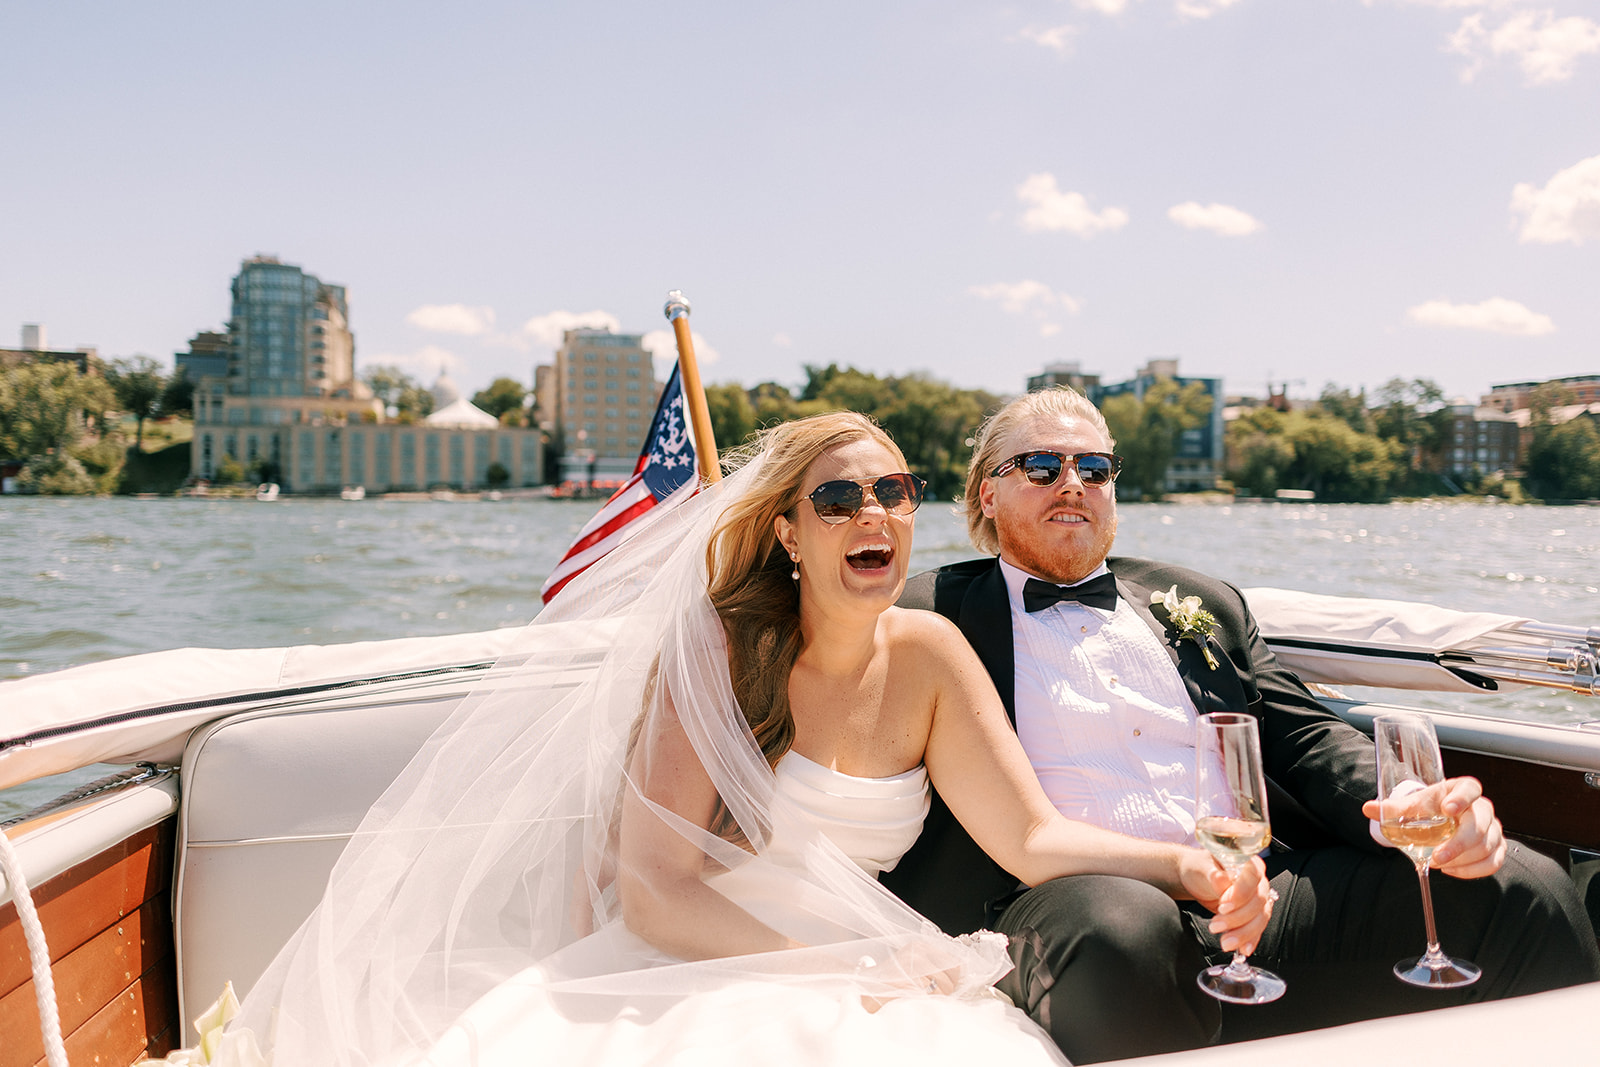 bride and groom enjoy a boat ride on lake mendota on their wedding day in madison wisconsin